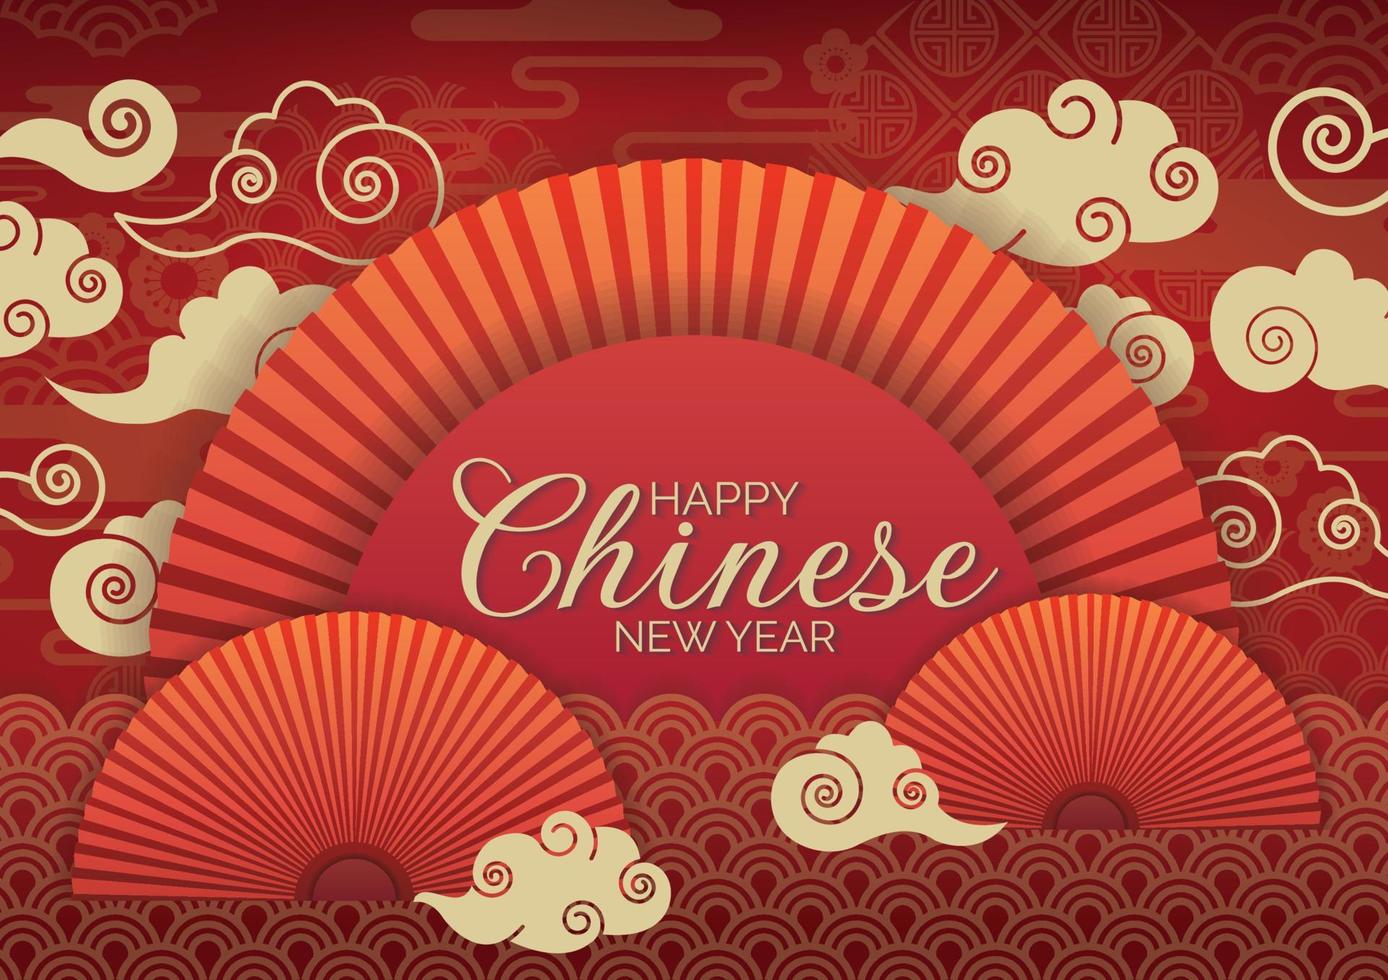 oriental background for chinese new year art banner design vector